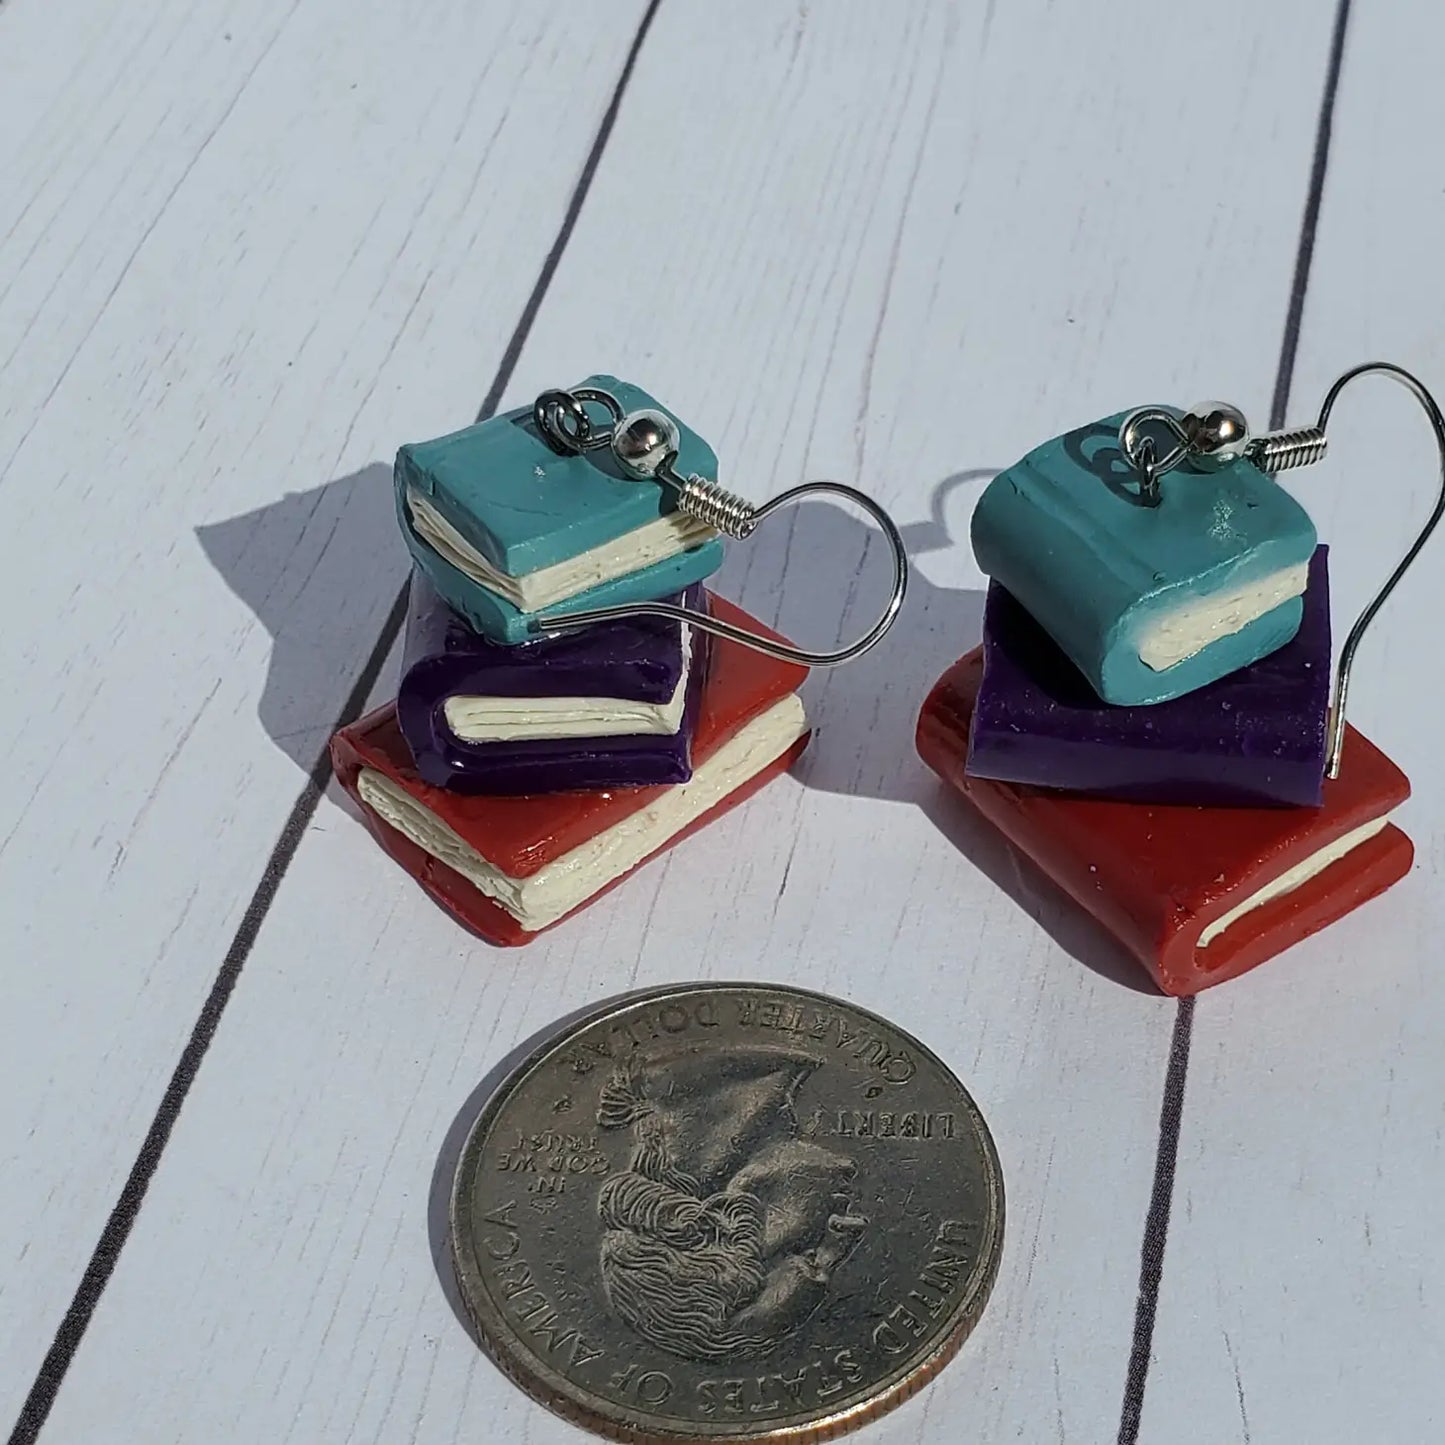 Load image into Gallery viewer, A pair of small, clay earrings in the shape of a stack of books, on a wooden table. The earrings are on a set of silver earring hooks. In front of the earrings is a US quarter, to show the size of the earrings in scale.
